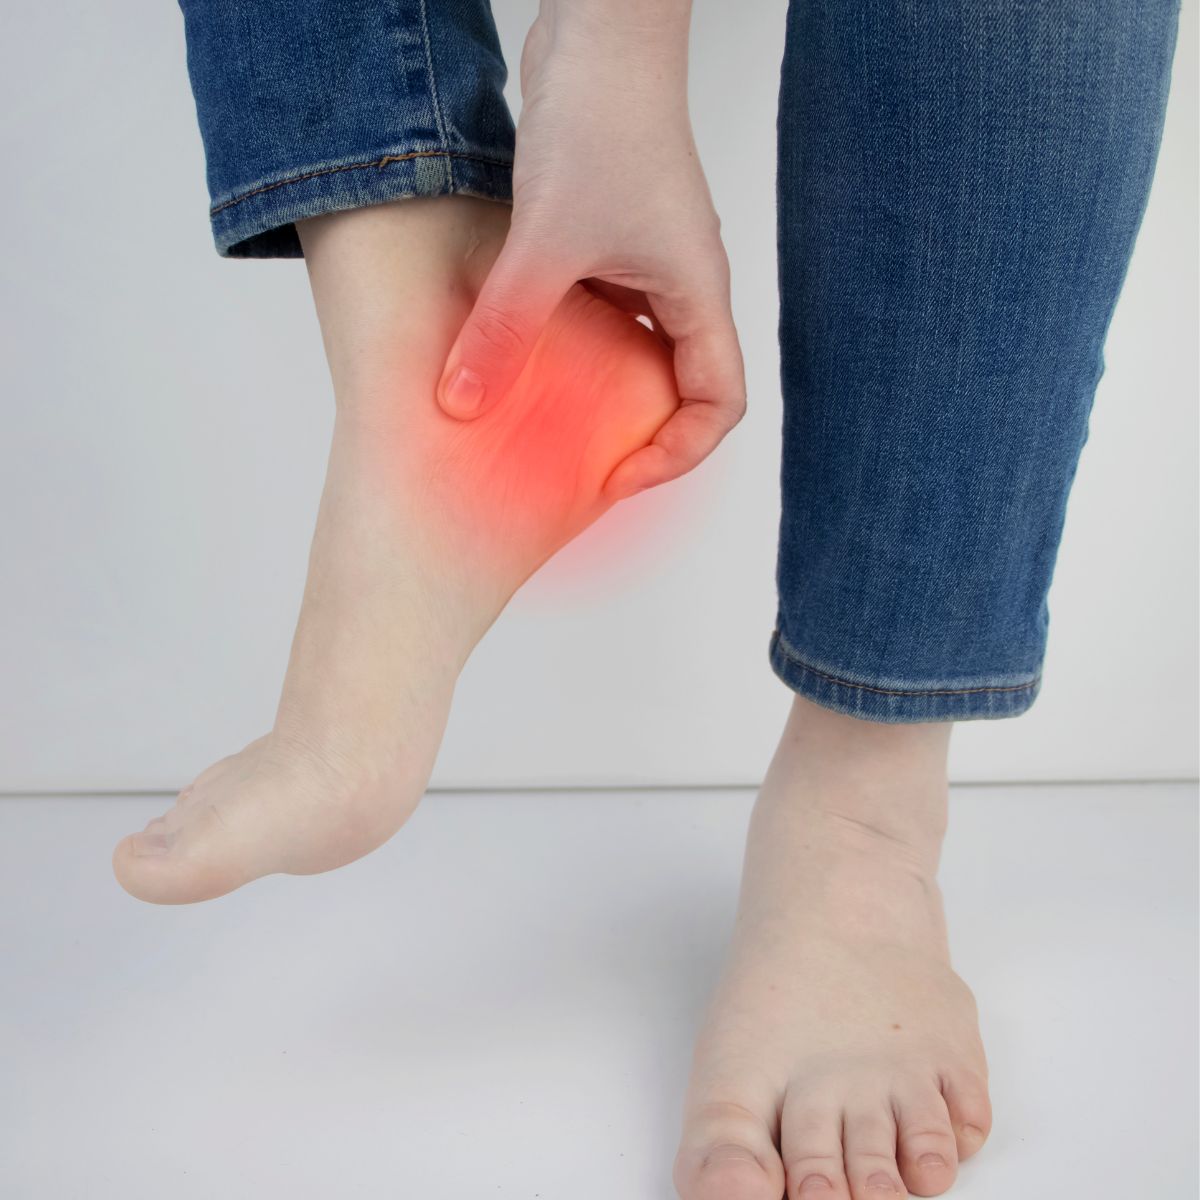 Tingling Around Heel: Common Causes and Treatments